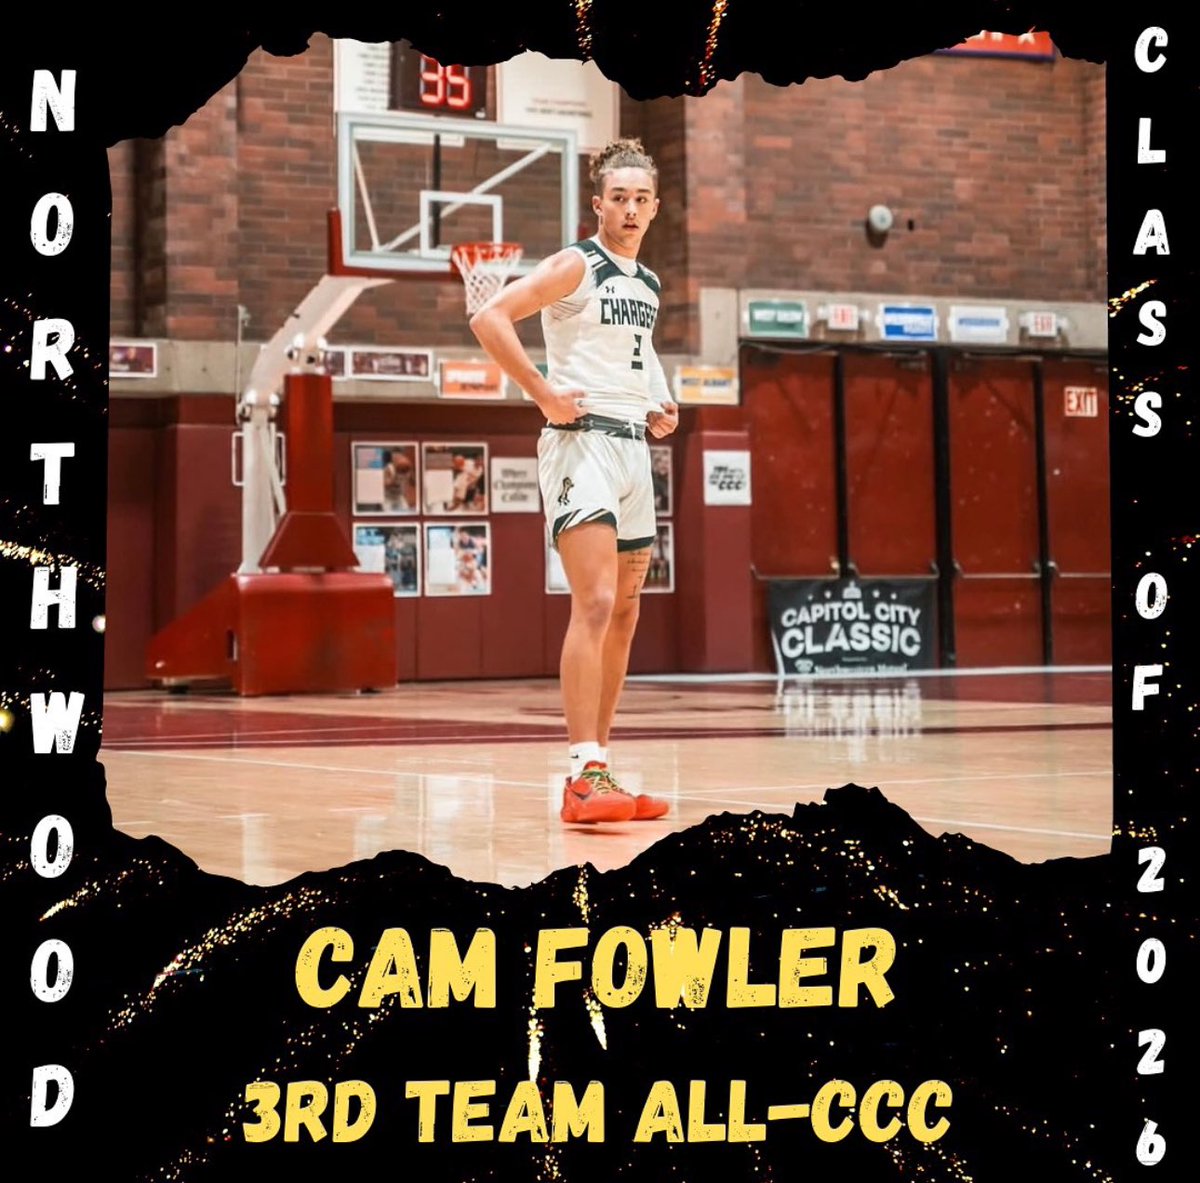 Congrats @Cambun_3 for making 3rd team all-ccc. So proud of you and your hard work. @capcitytourney